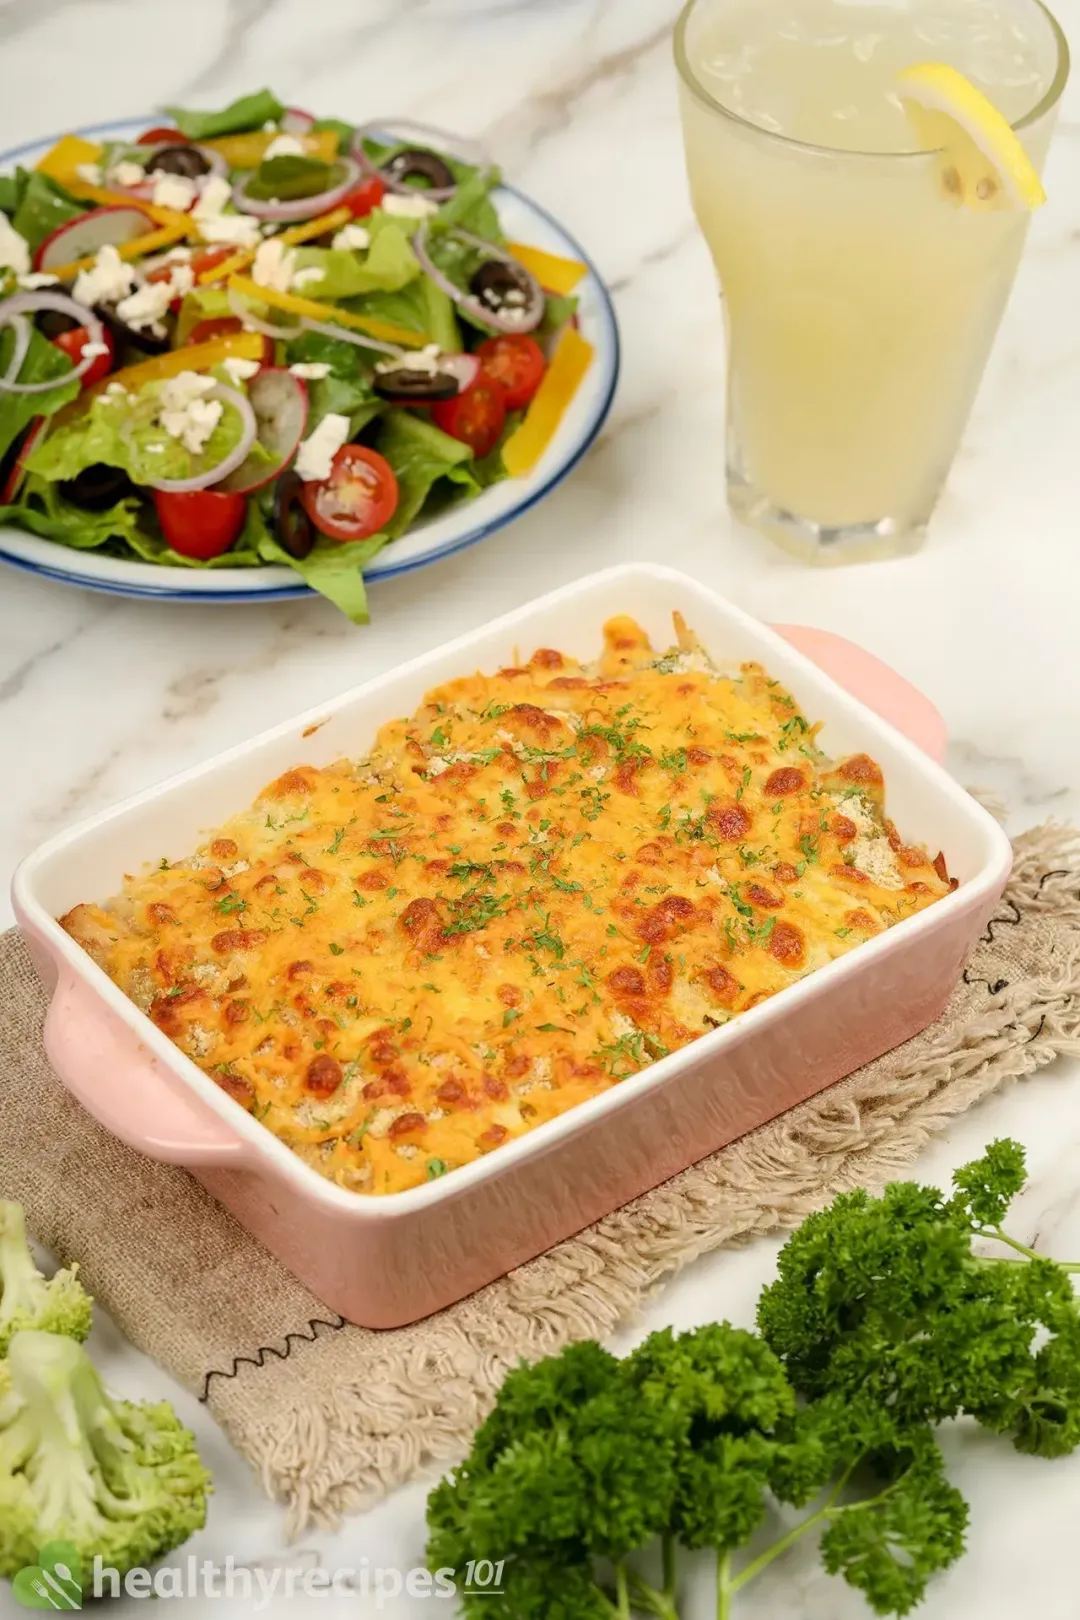 What to Serve With Chicken Broccoli Rice Casserole